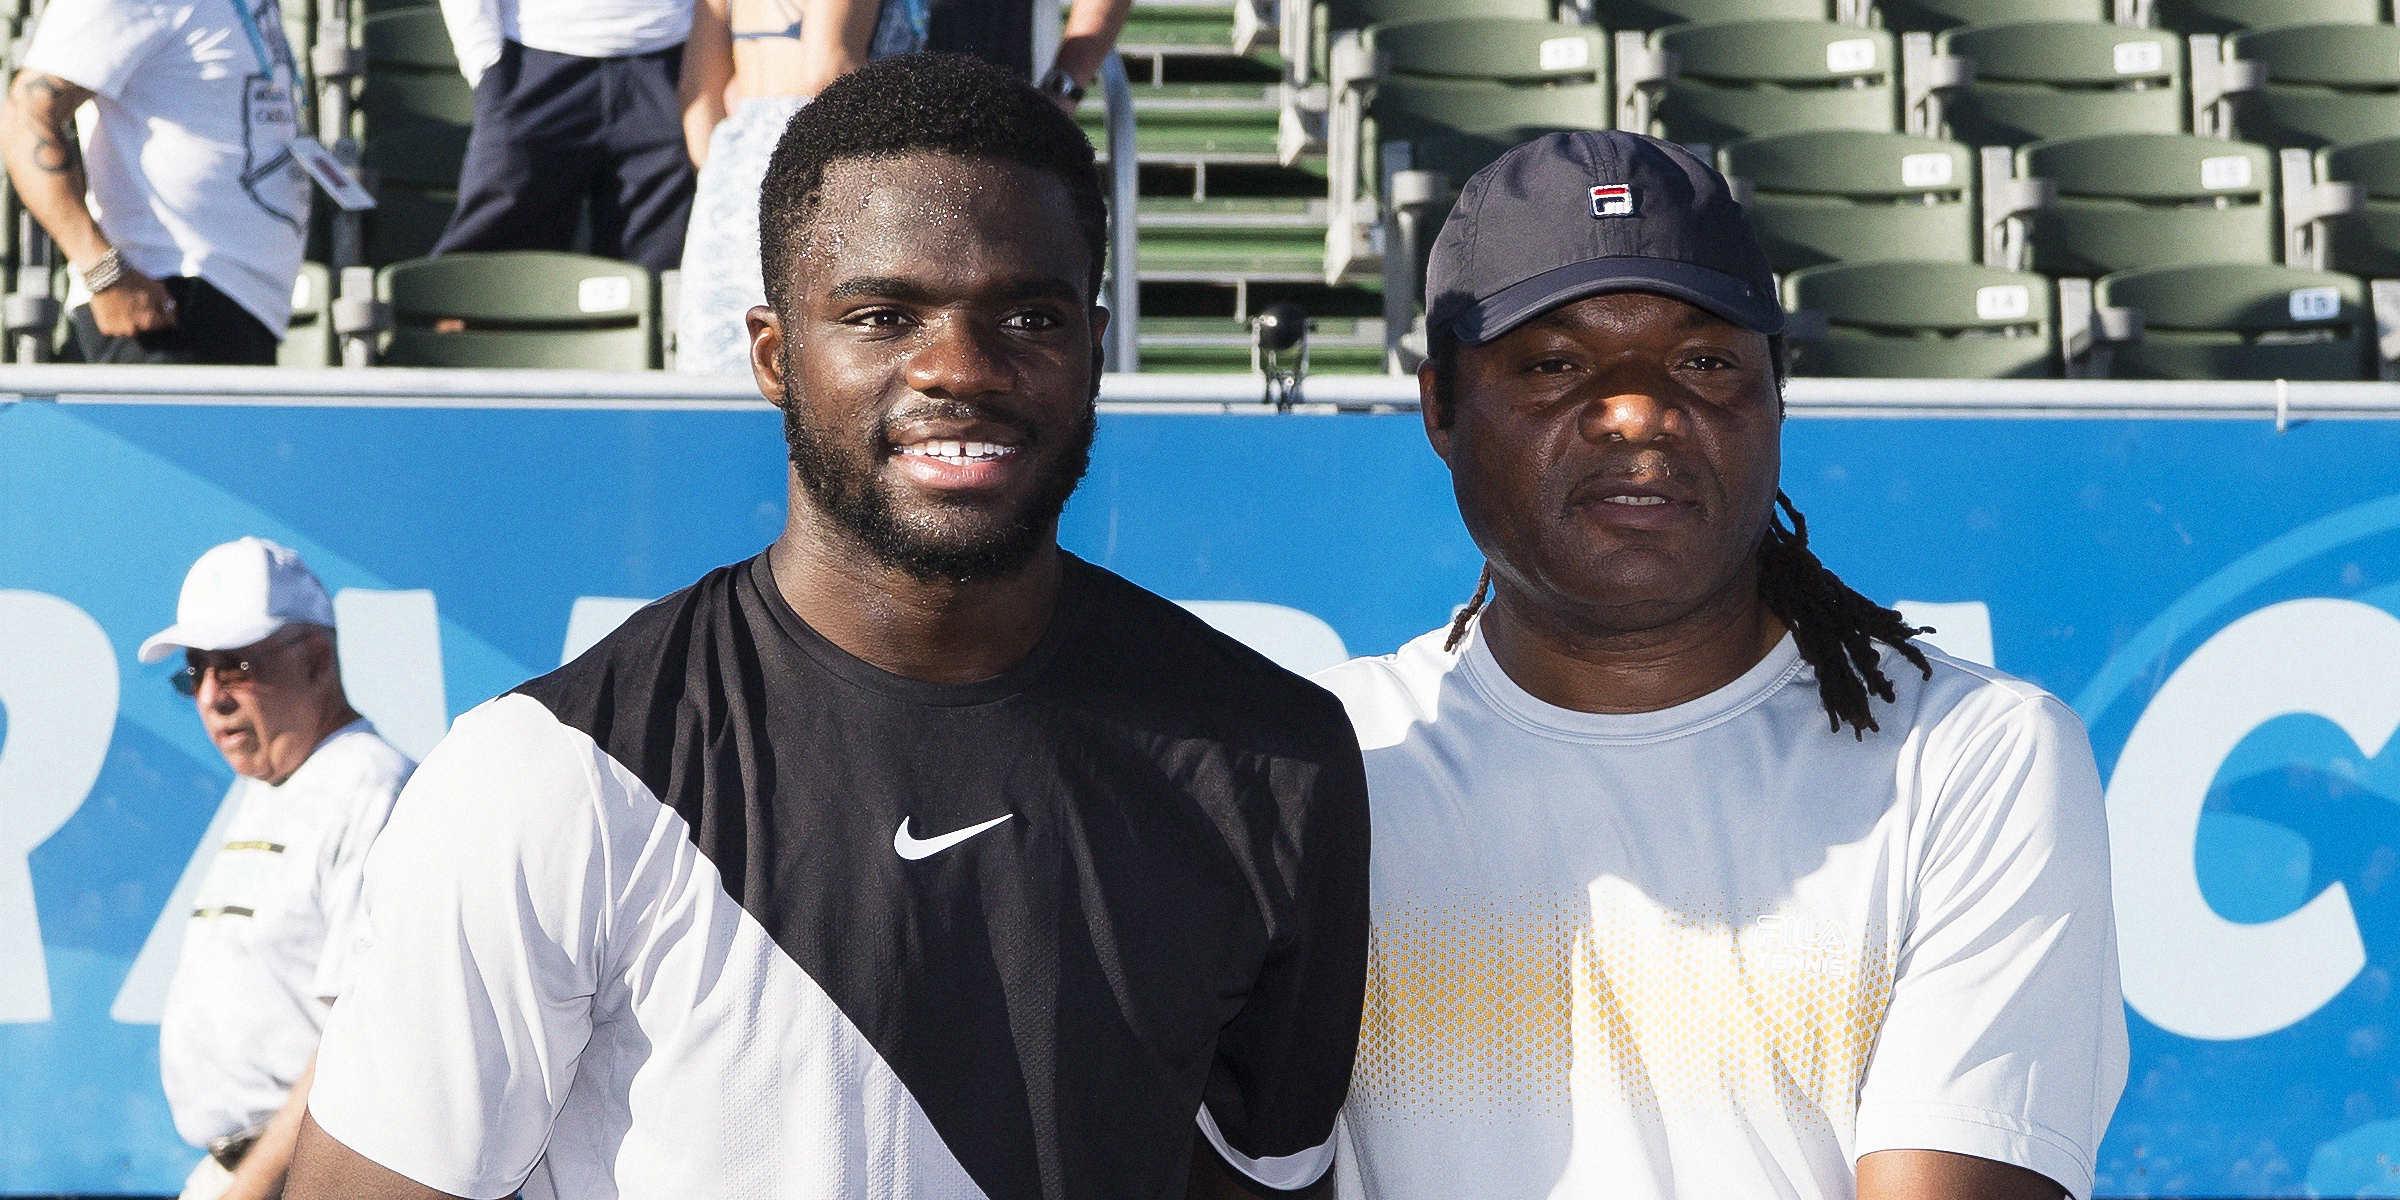 Frances Tiafoe and Constant Tiafoe. | Source: Getty Images